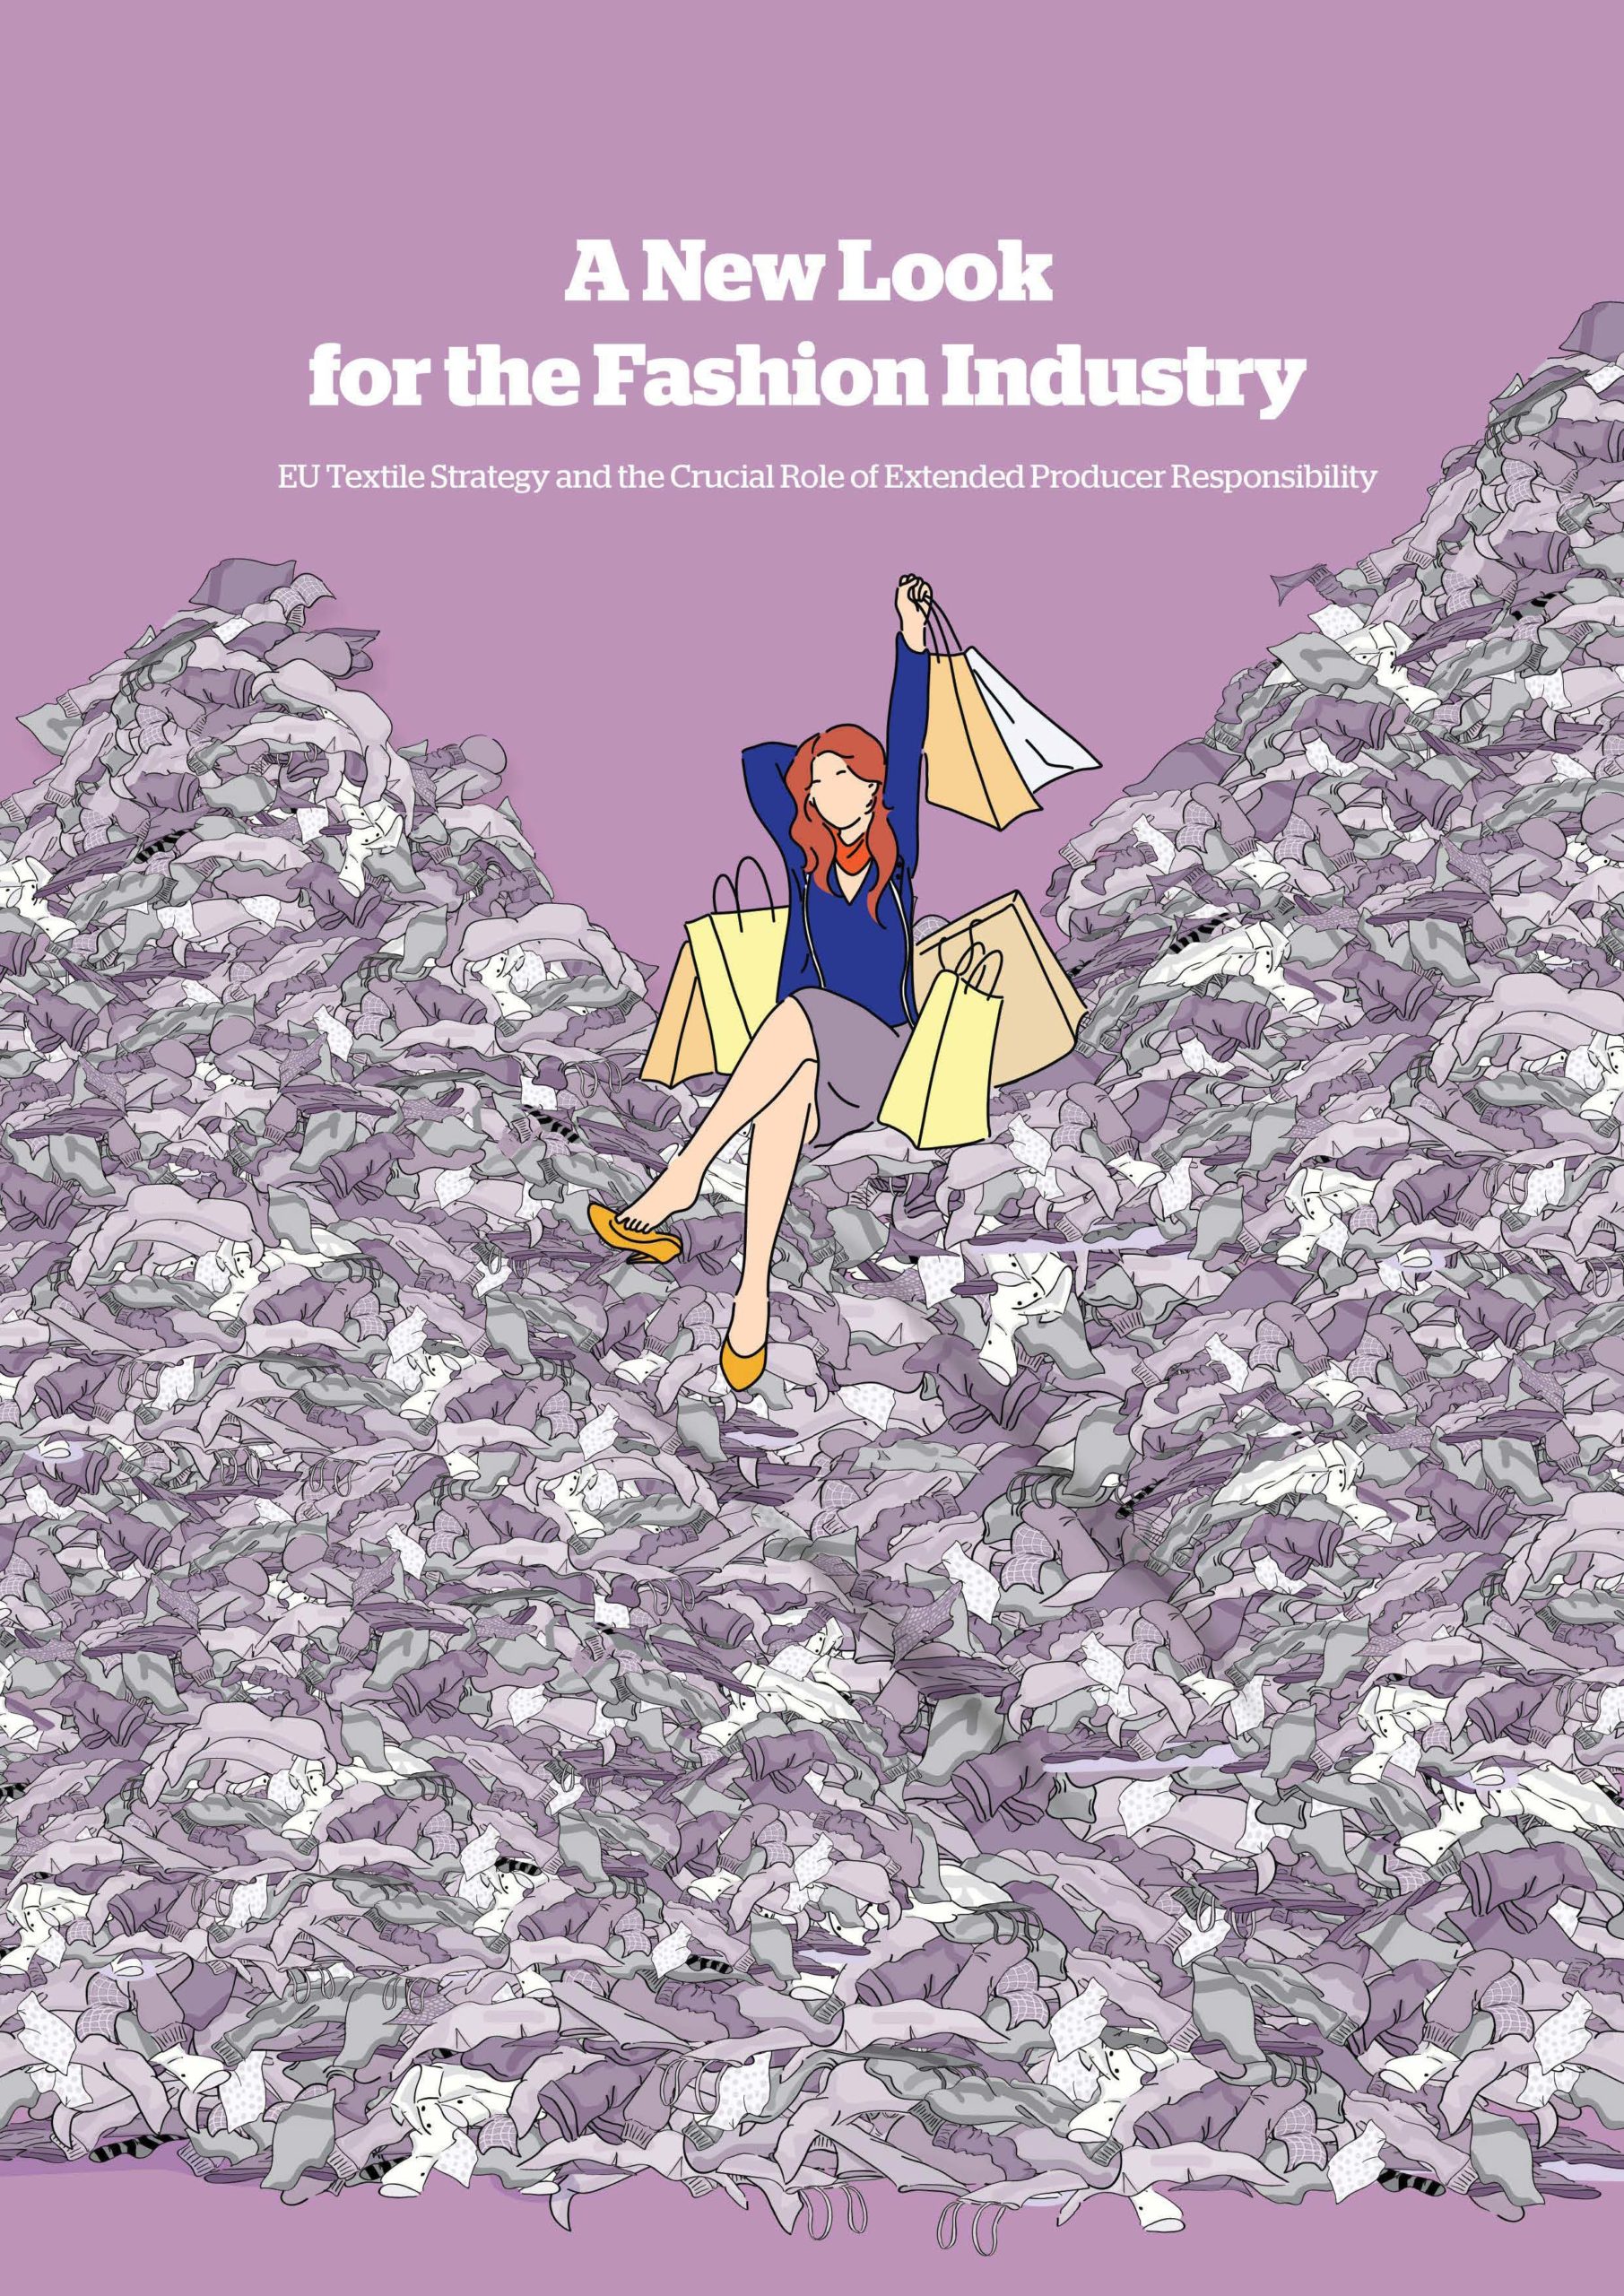 A New Look for the Fashion Industry – EU Textile Strategy and the crucial role of Extended Producer Responsibility